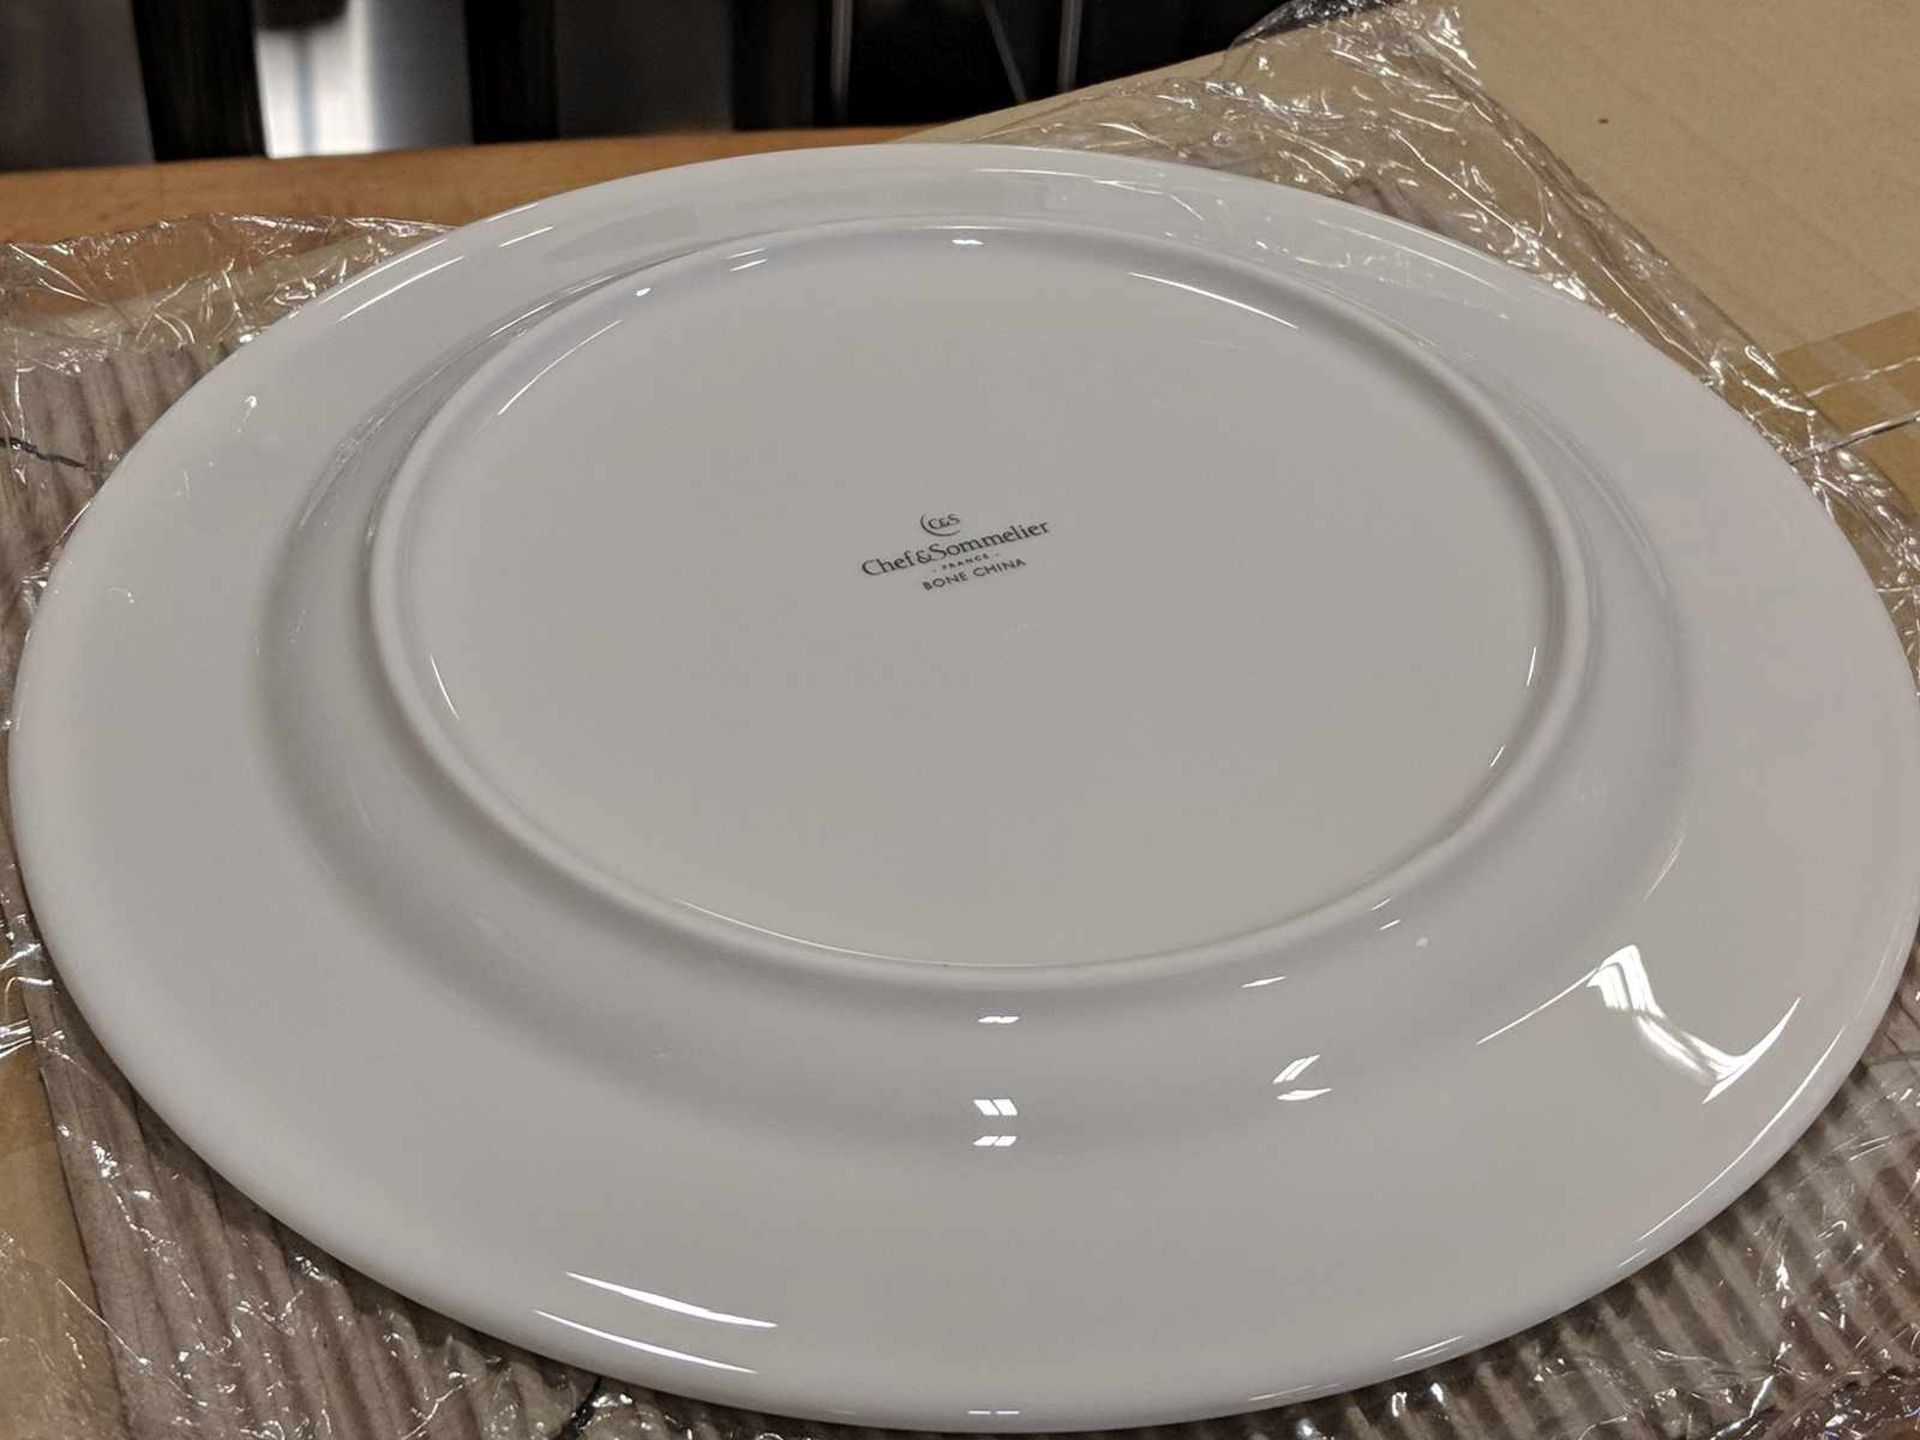 11" Infinity Dinner Plates - Lot of 48 (4 Cases), Arcoroc R1003 - Image 2 of 3